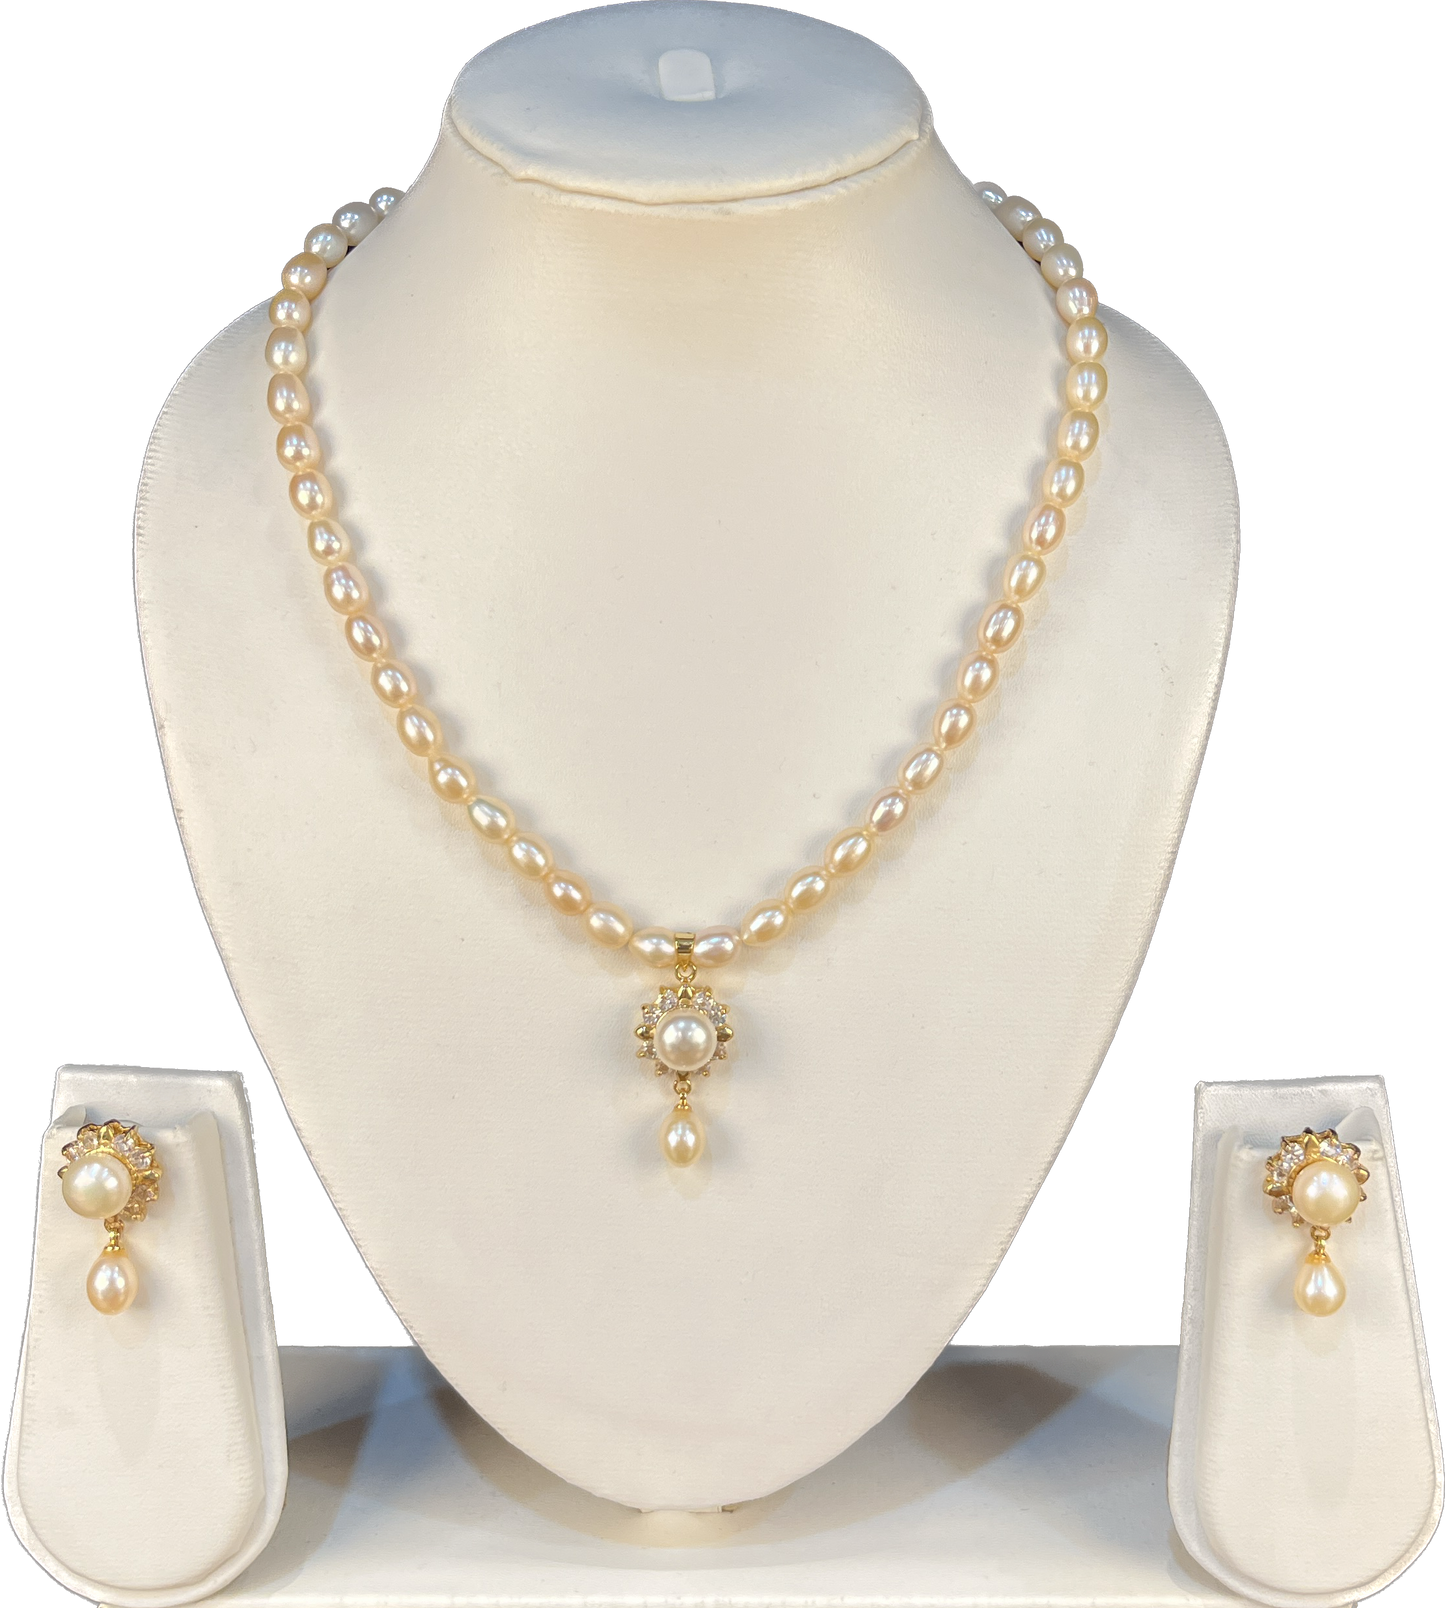 Bliss - 7 mm Pearls Necklace Set